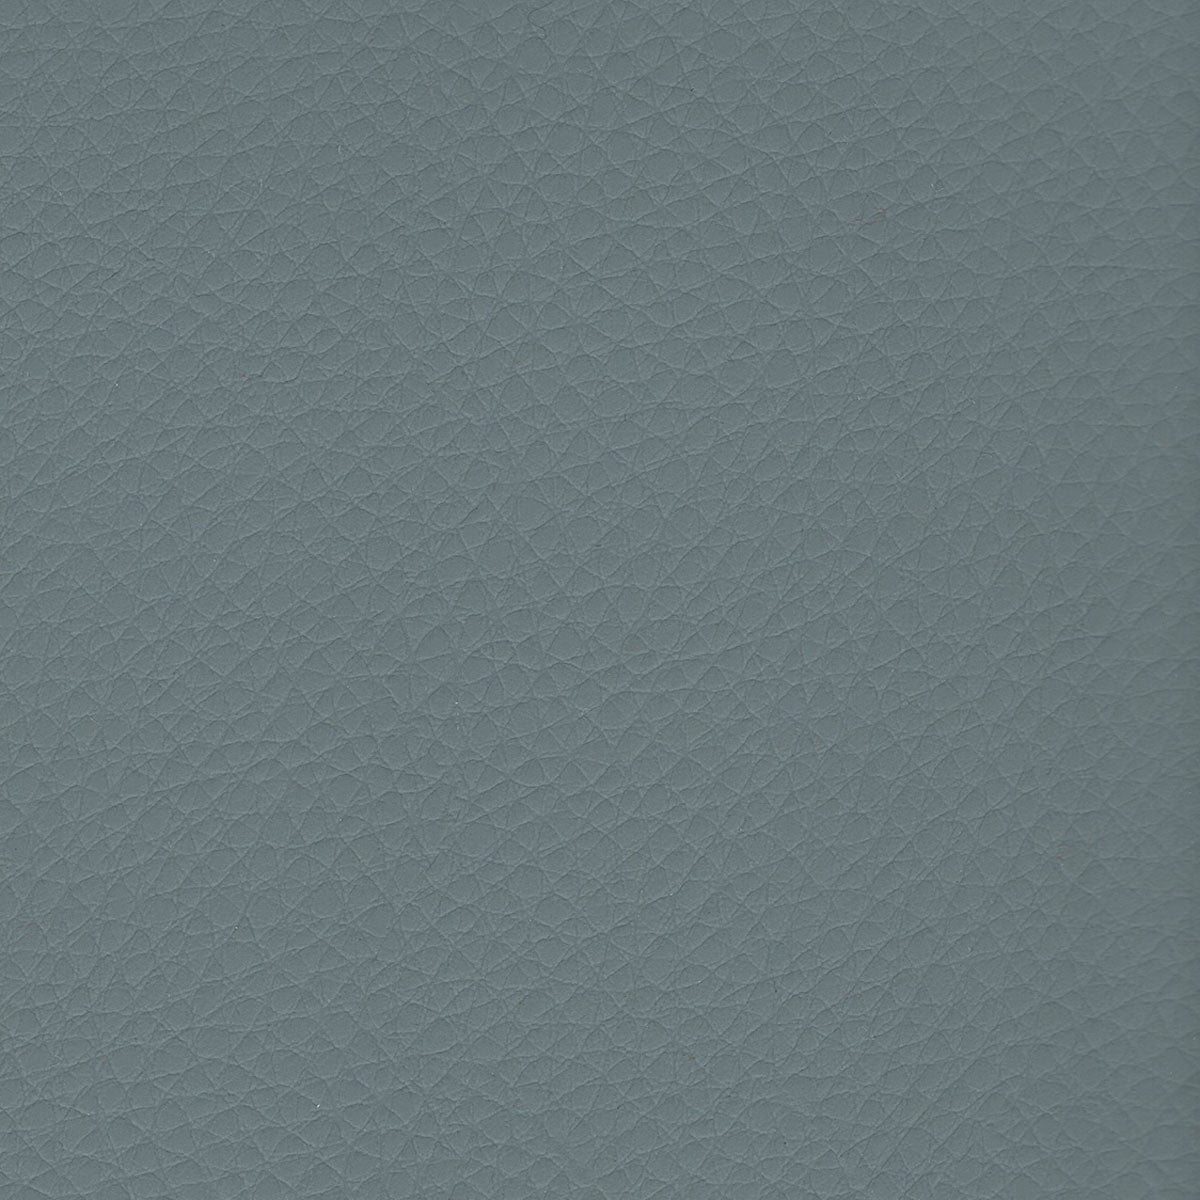 Premier-314 Stone Leatherette by Sileather